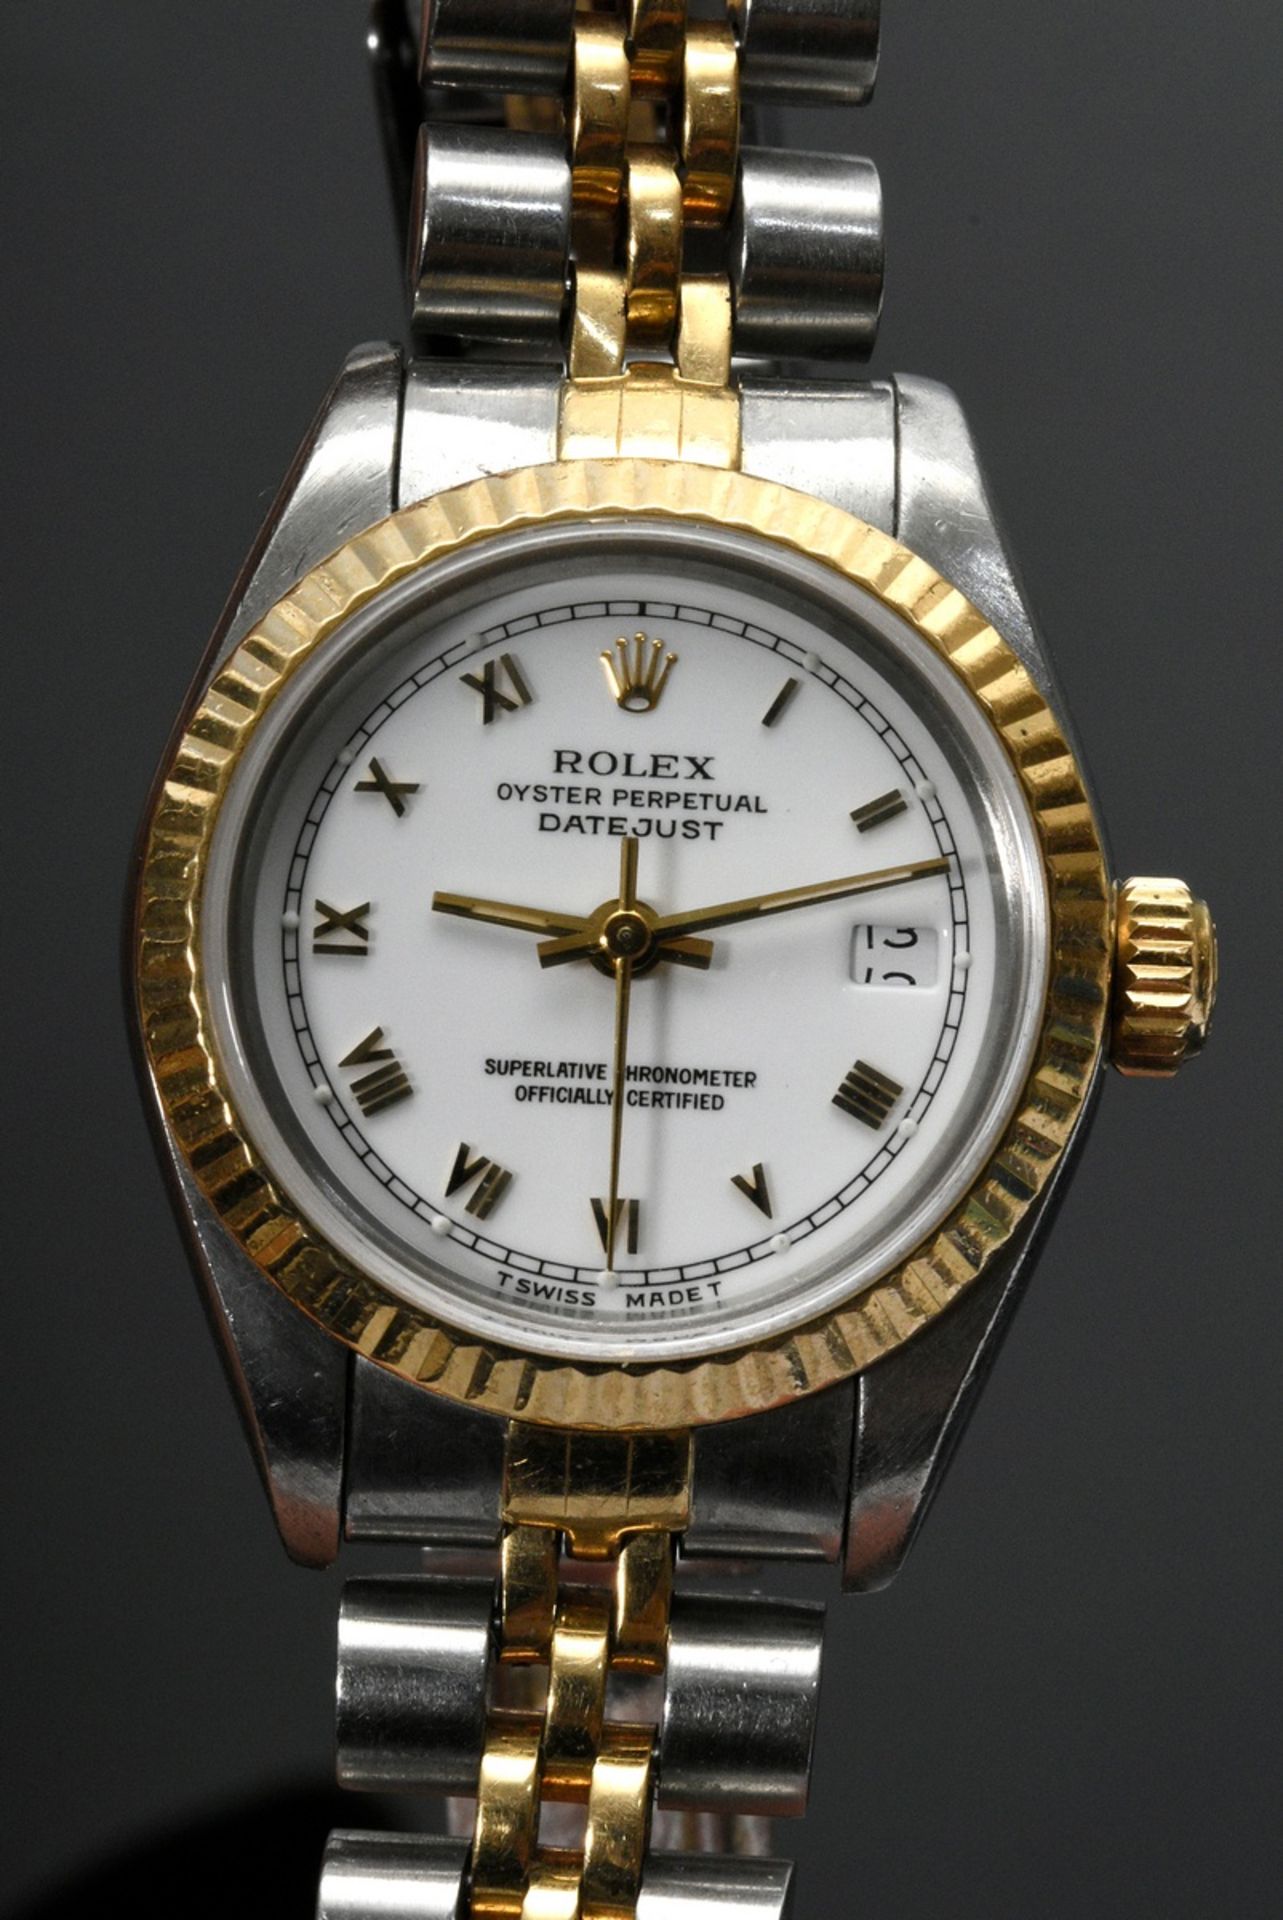 Stainless steel/yellow gold 750 Rolex "Oyster Perpetual Lady-Datejust", automatic movement, white d - Image 6 of 6